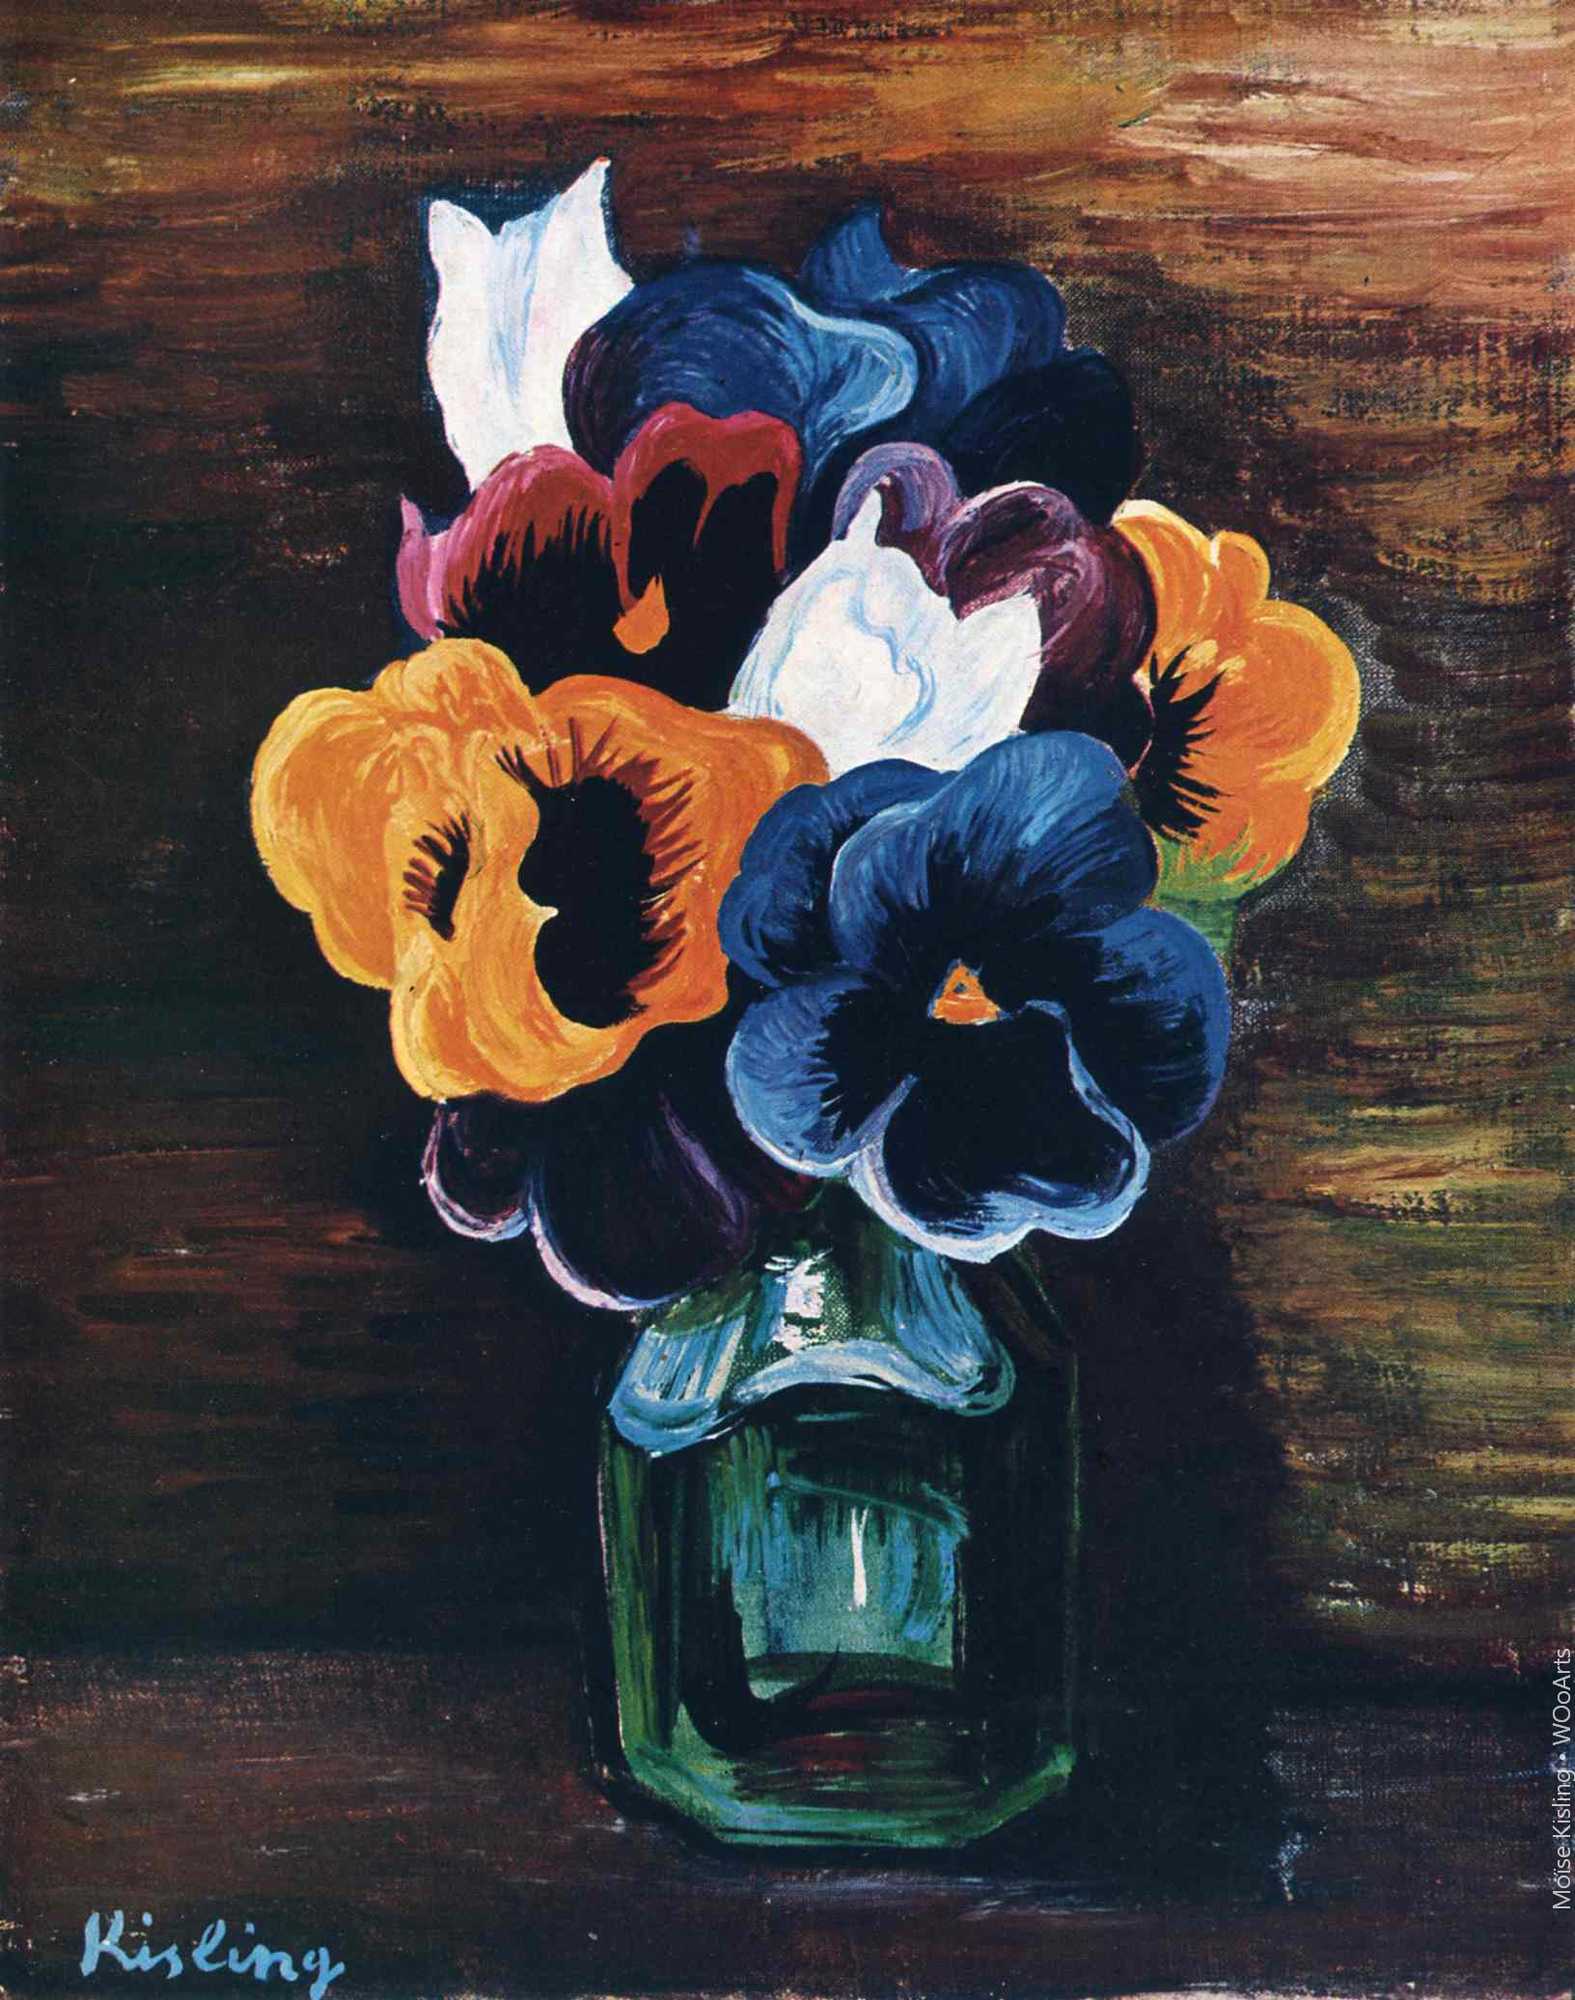 Painting by Moïse Kisling